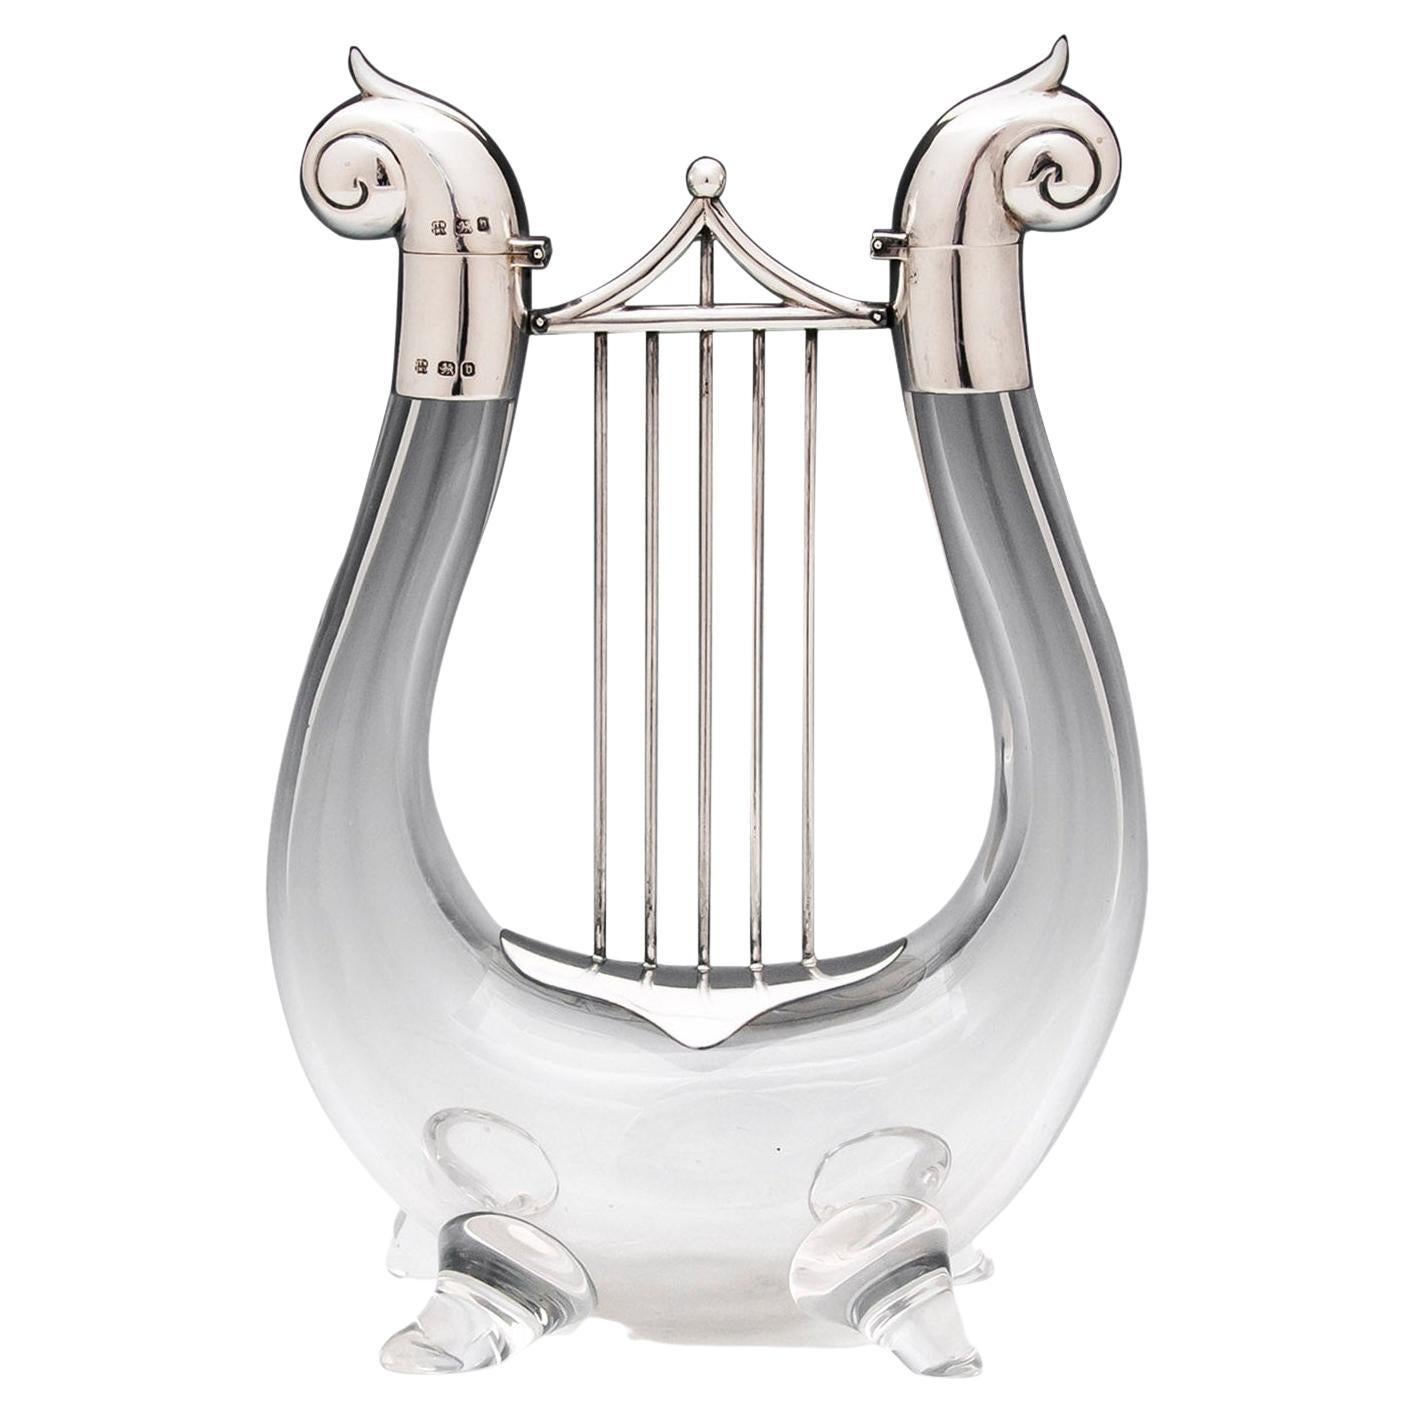 With Sterling Silver Mounts

From our Decanter collection, we are delighted to offer this very unusual late 19th-century Novelty Decanter. The Decanter modelled as a classical Lyre with glass body, Sterling Silver scrolling mounts and crossbar. The